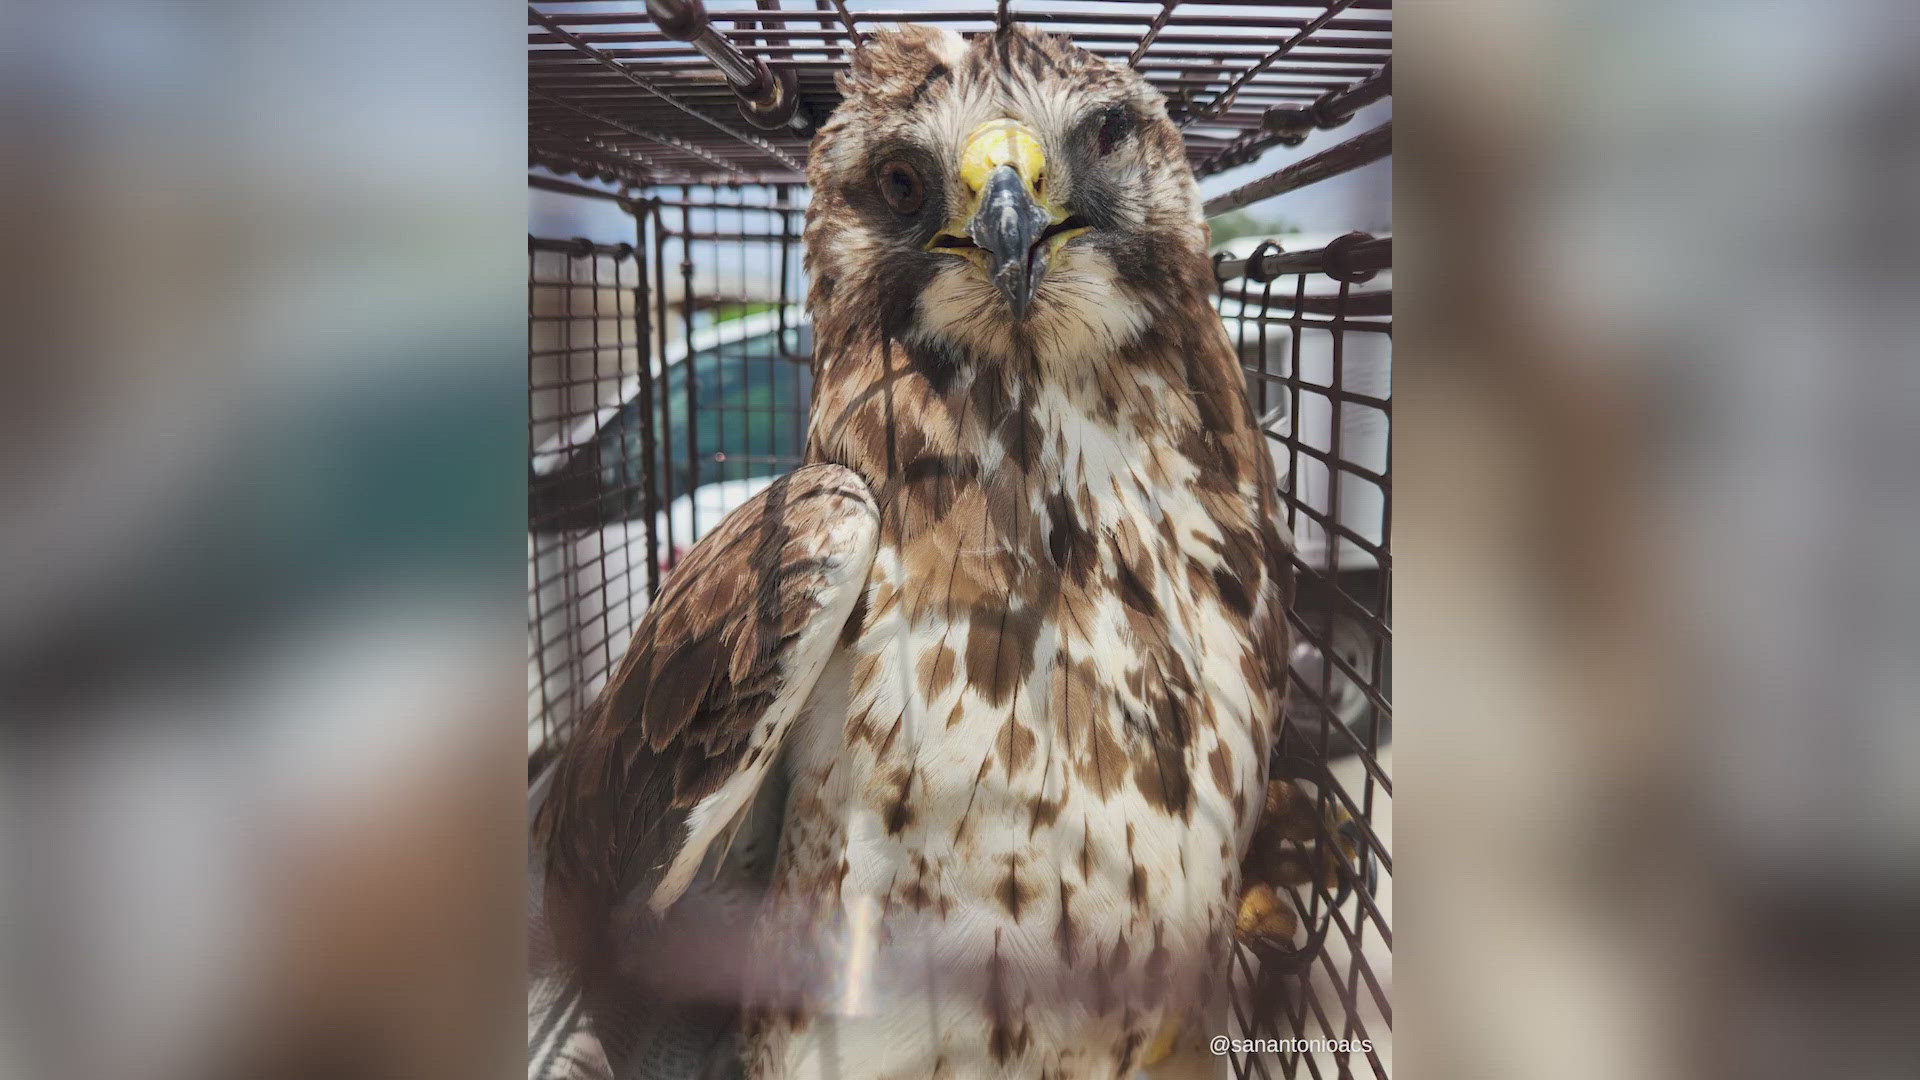 City of San Antonio Animal Care officers rescued this broad-winged hawk that had an injured eye.